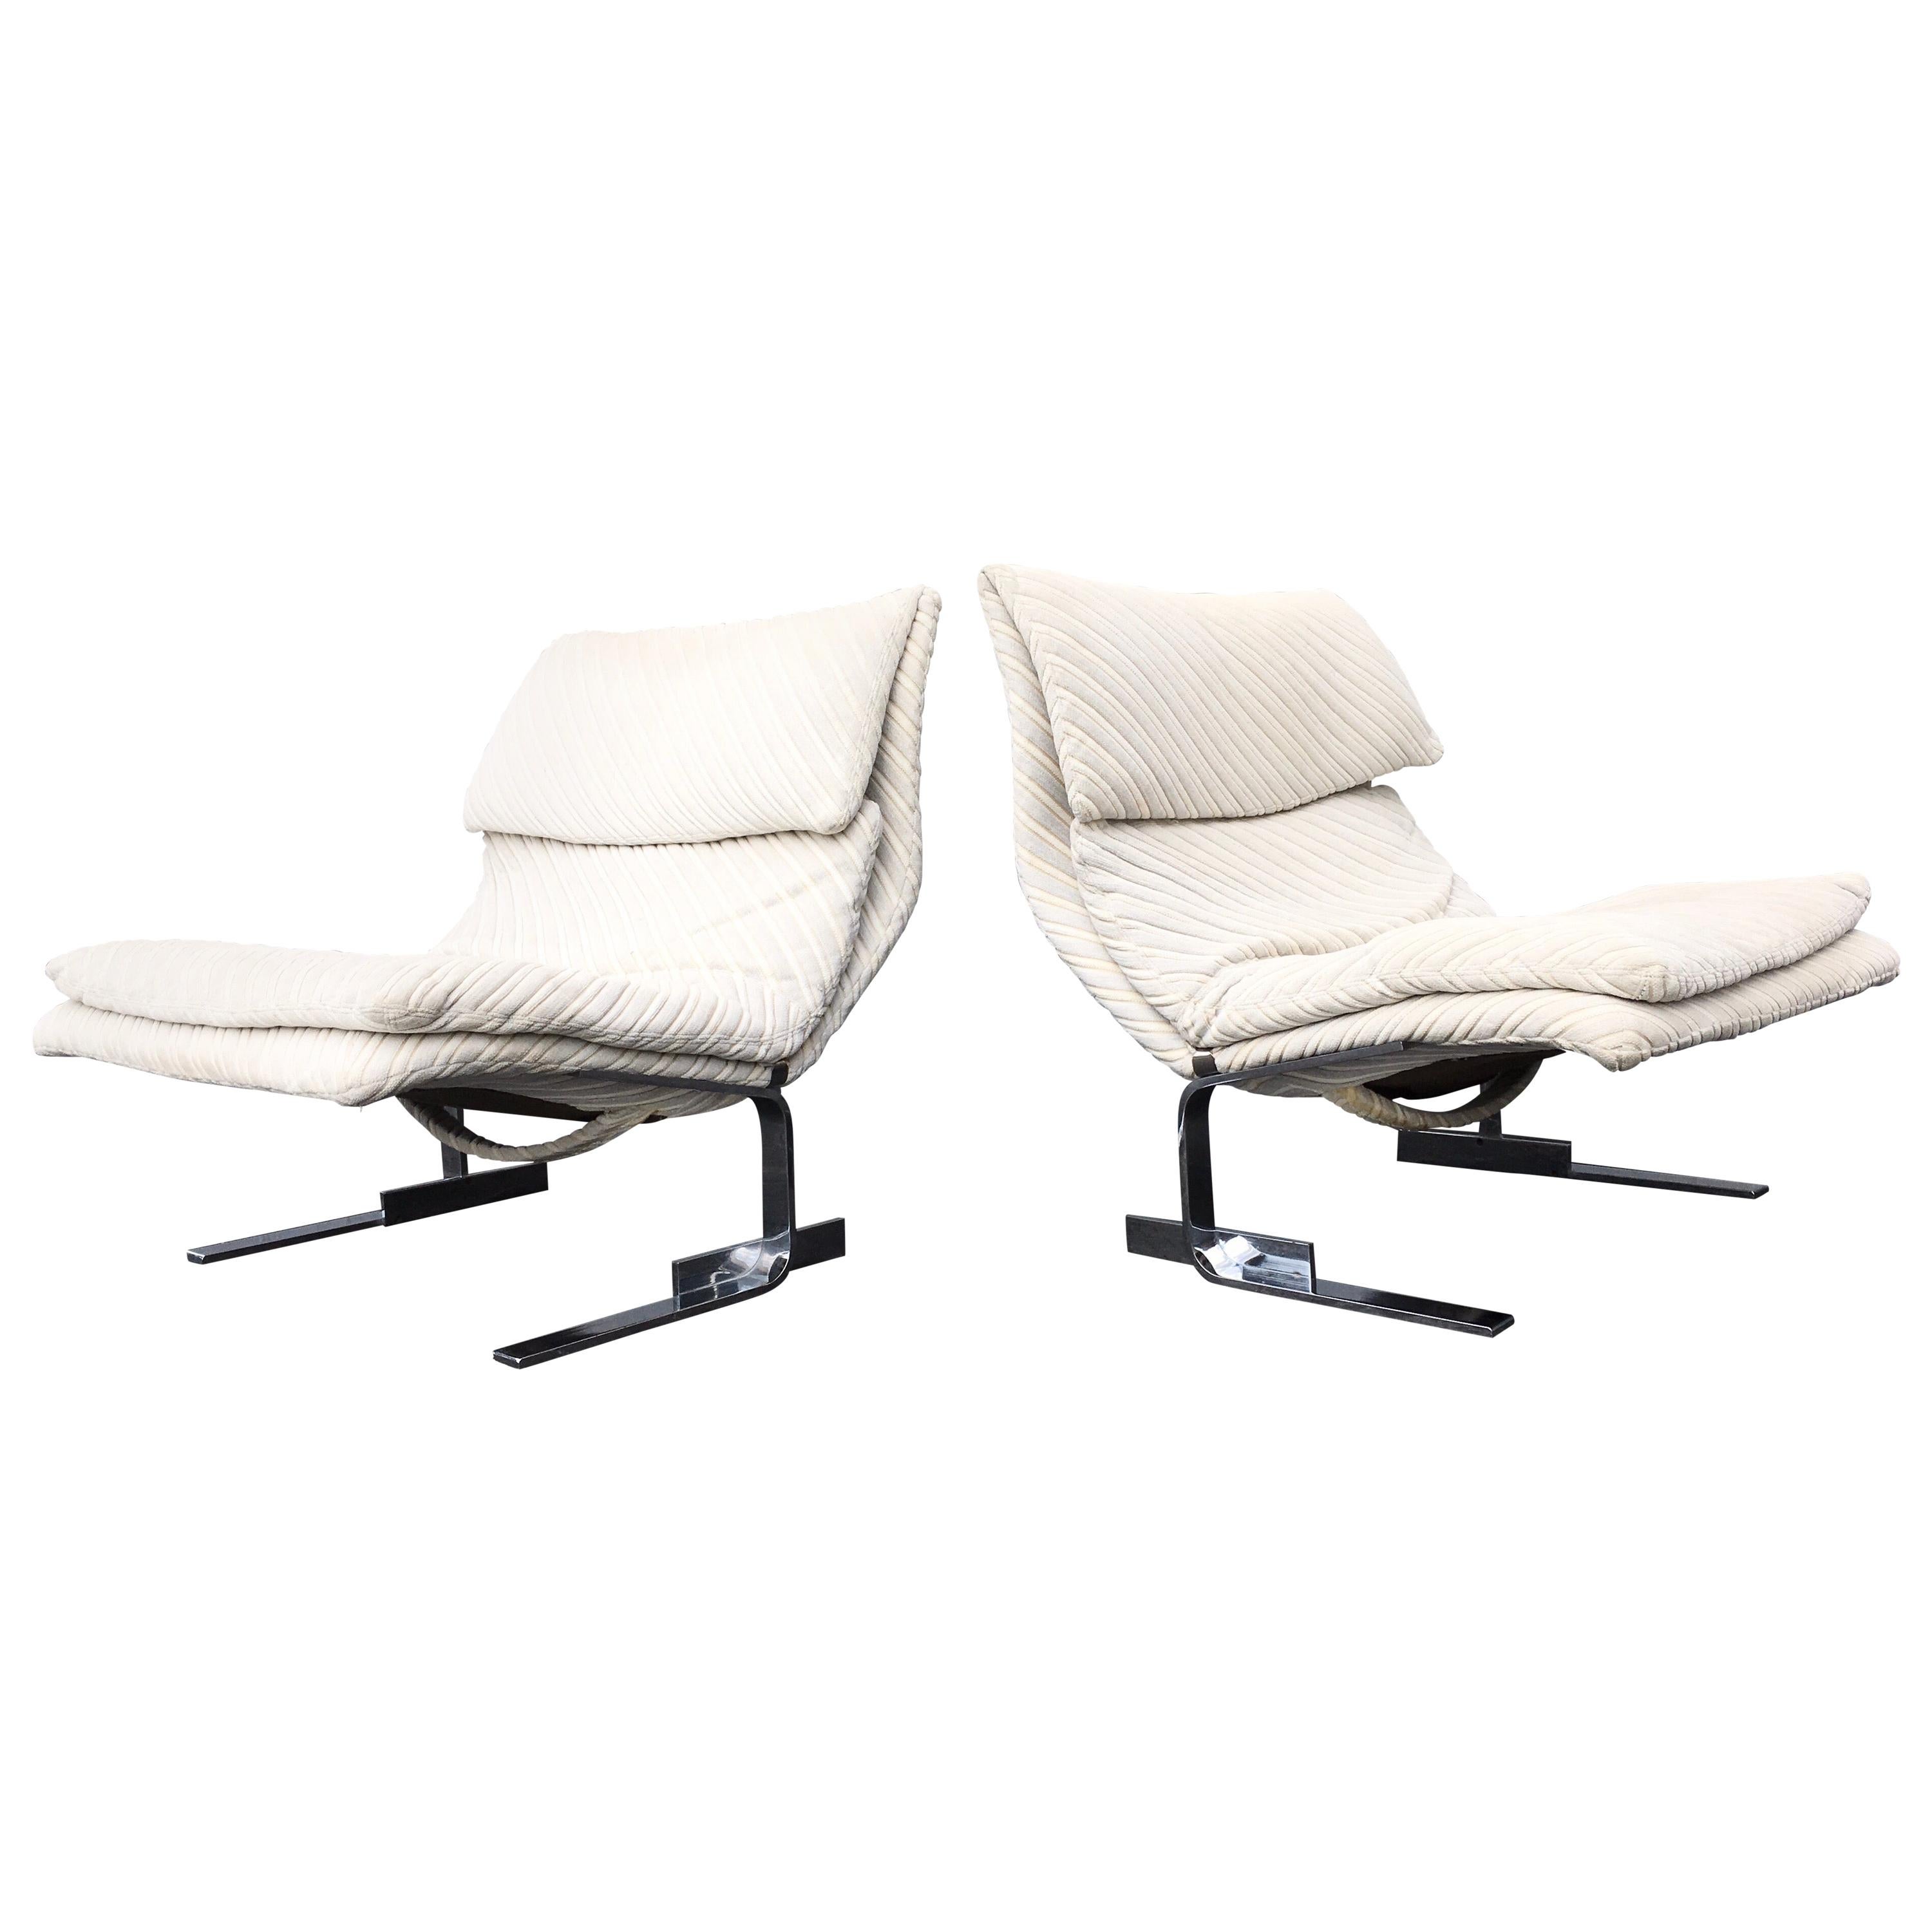 Pair of Onda Wave Lounge Chairs by Giovanni Offredi for Saporiti, Italy, 1970s